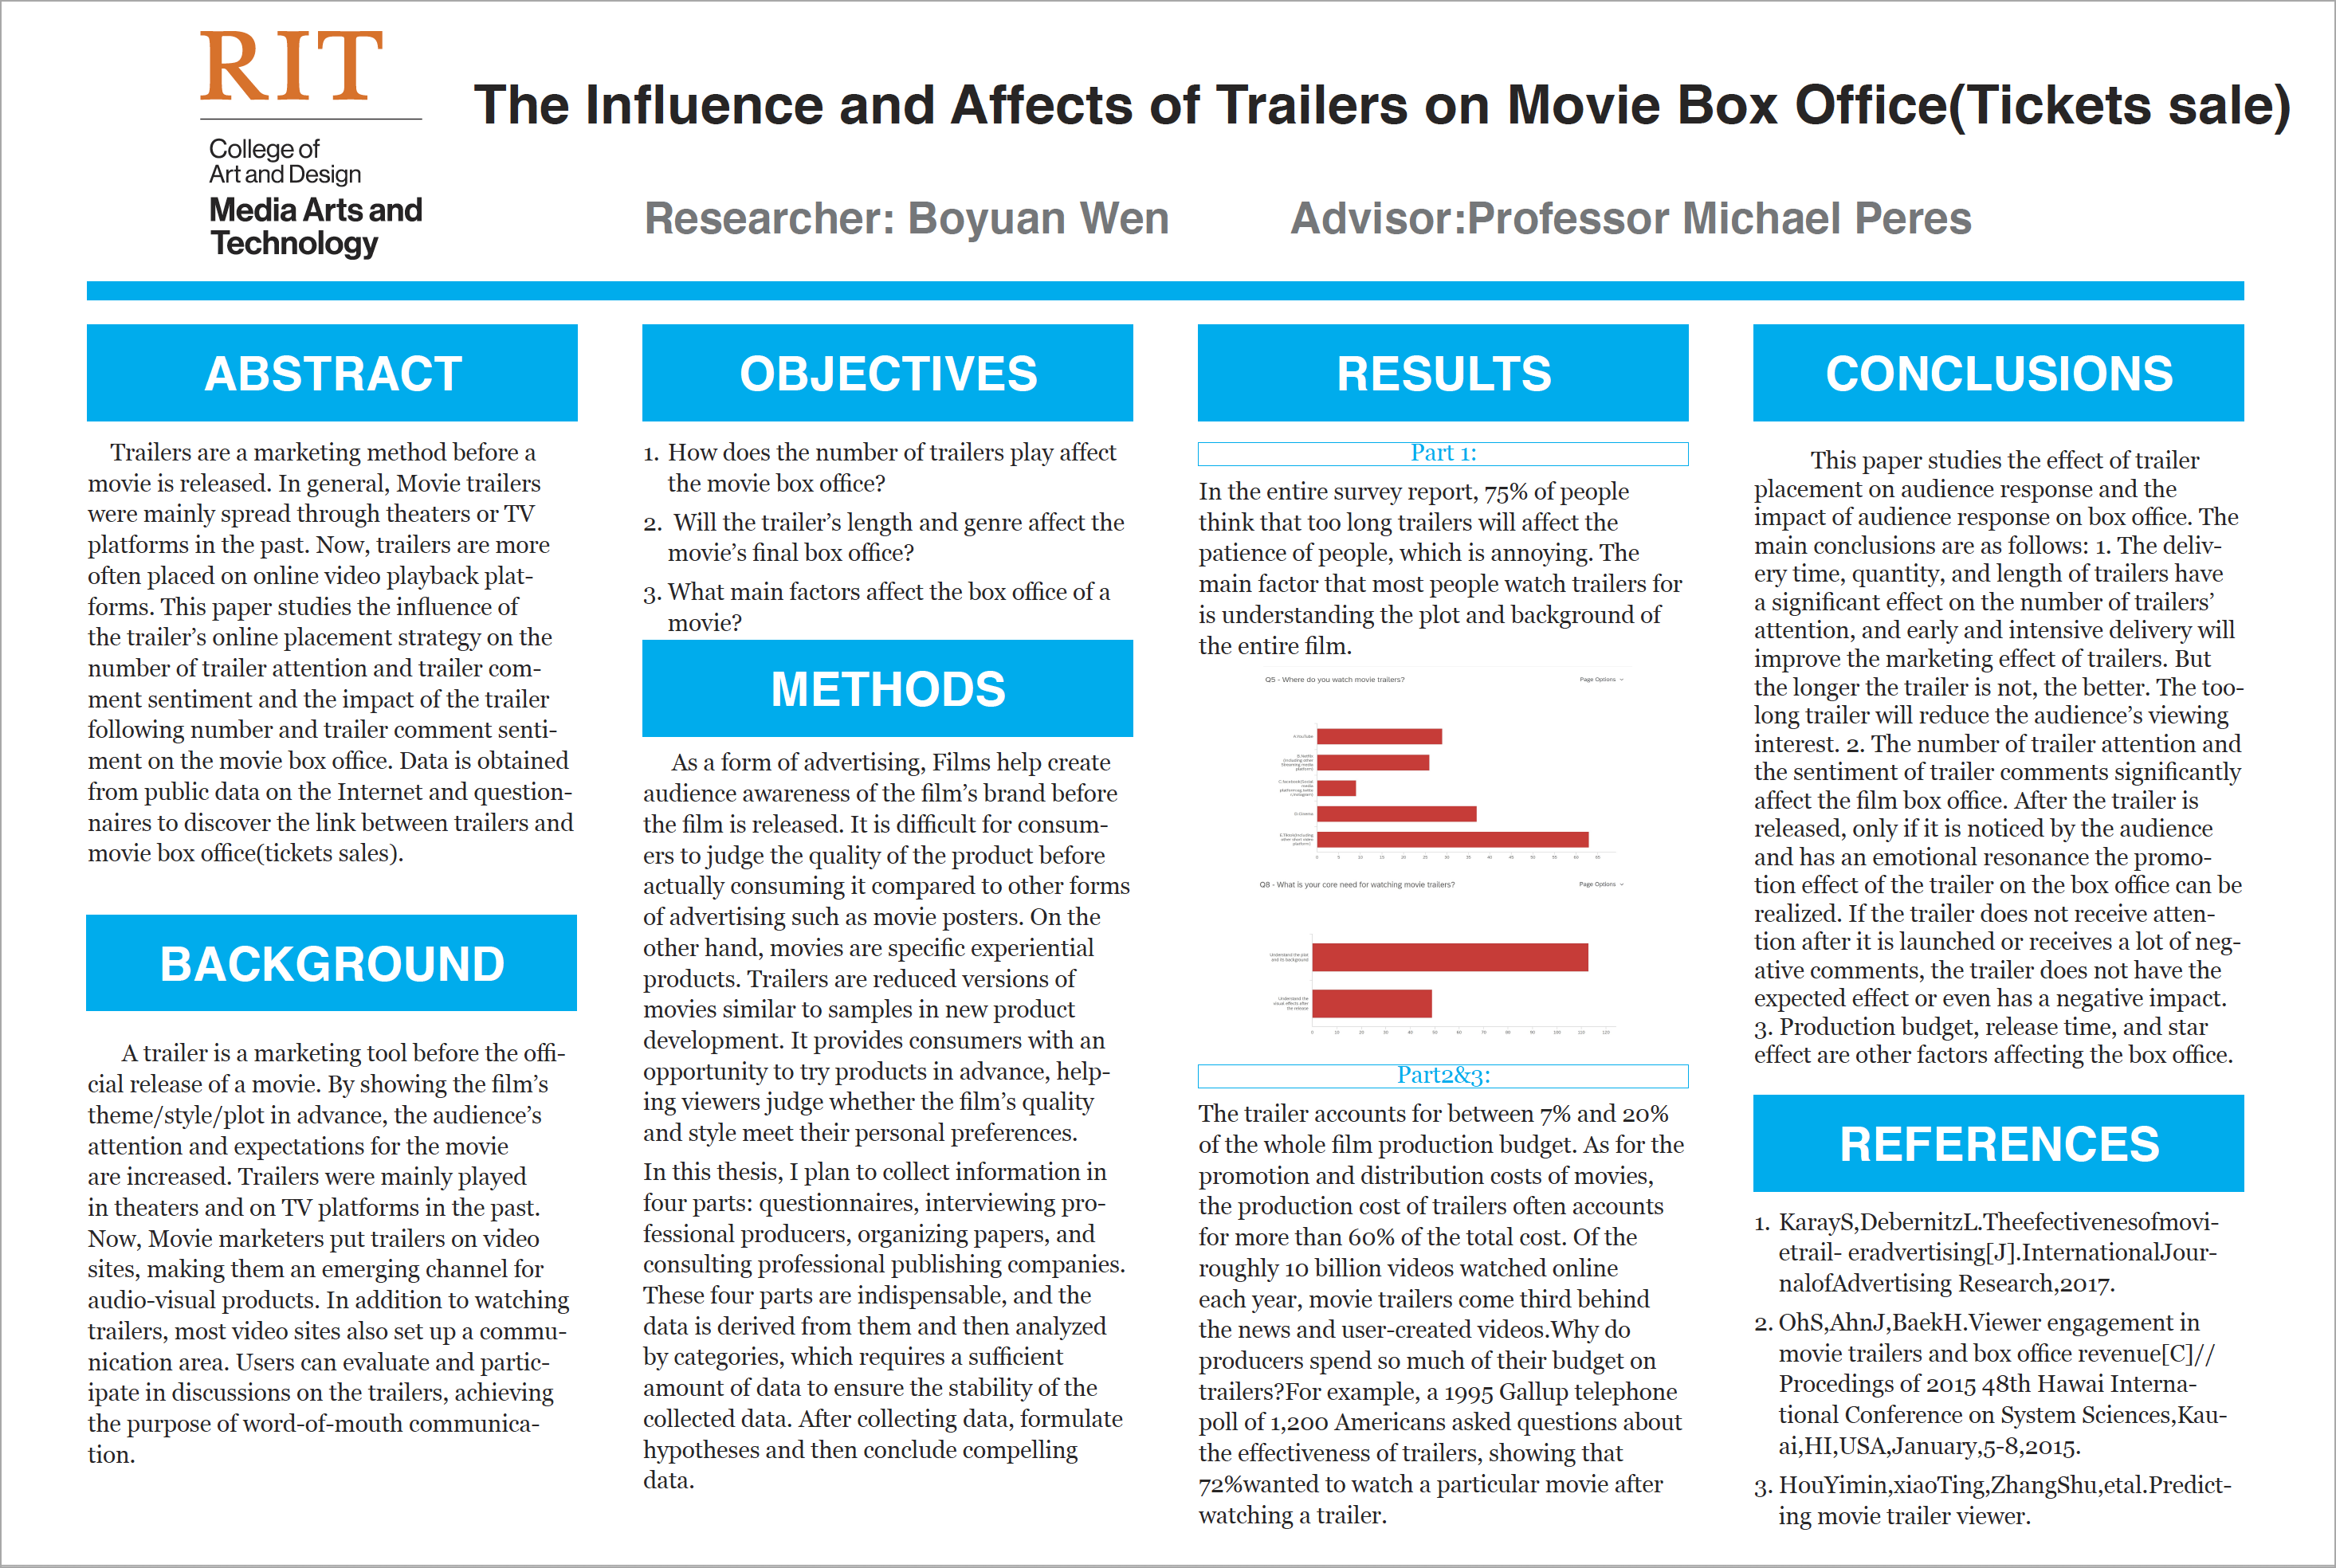 A poster highlighting research on the influence and affects of trailers on movie box office ticket sales.